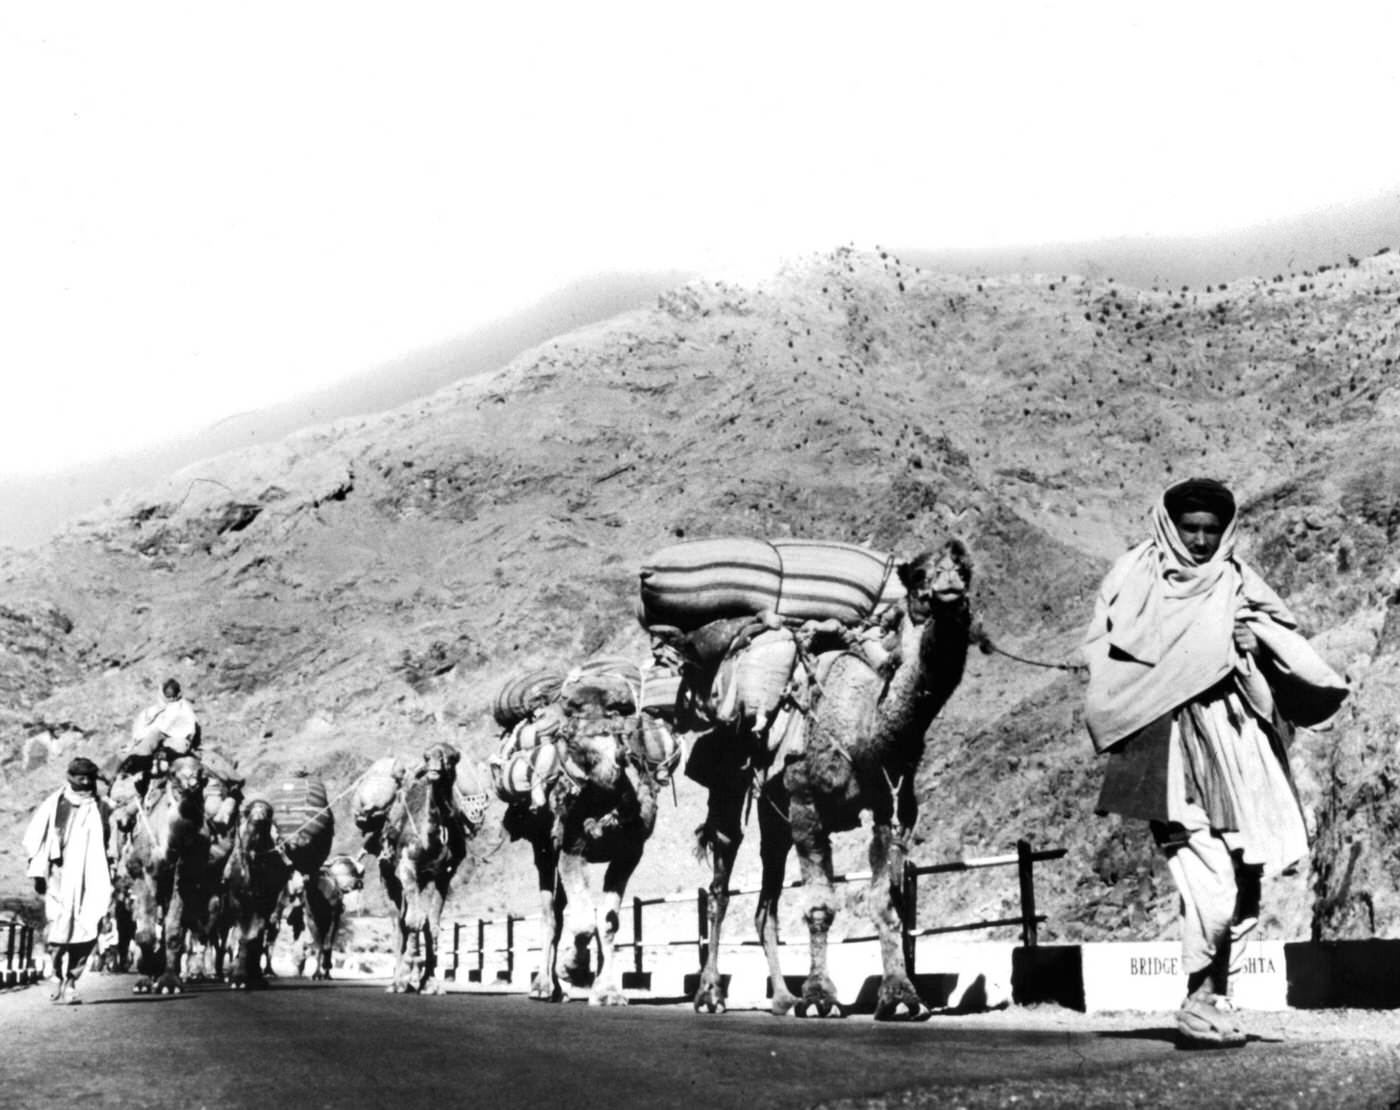 Camel caravans coming from Kabul, Afghanistan through Khyber Pass, 1955.